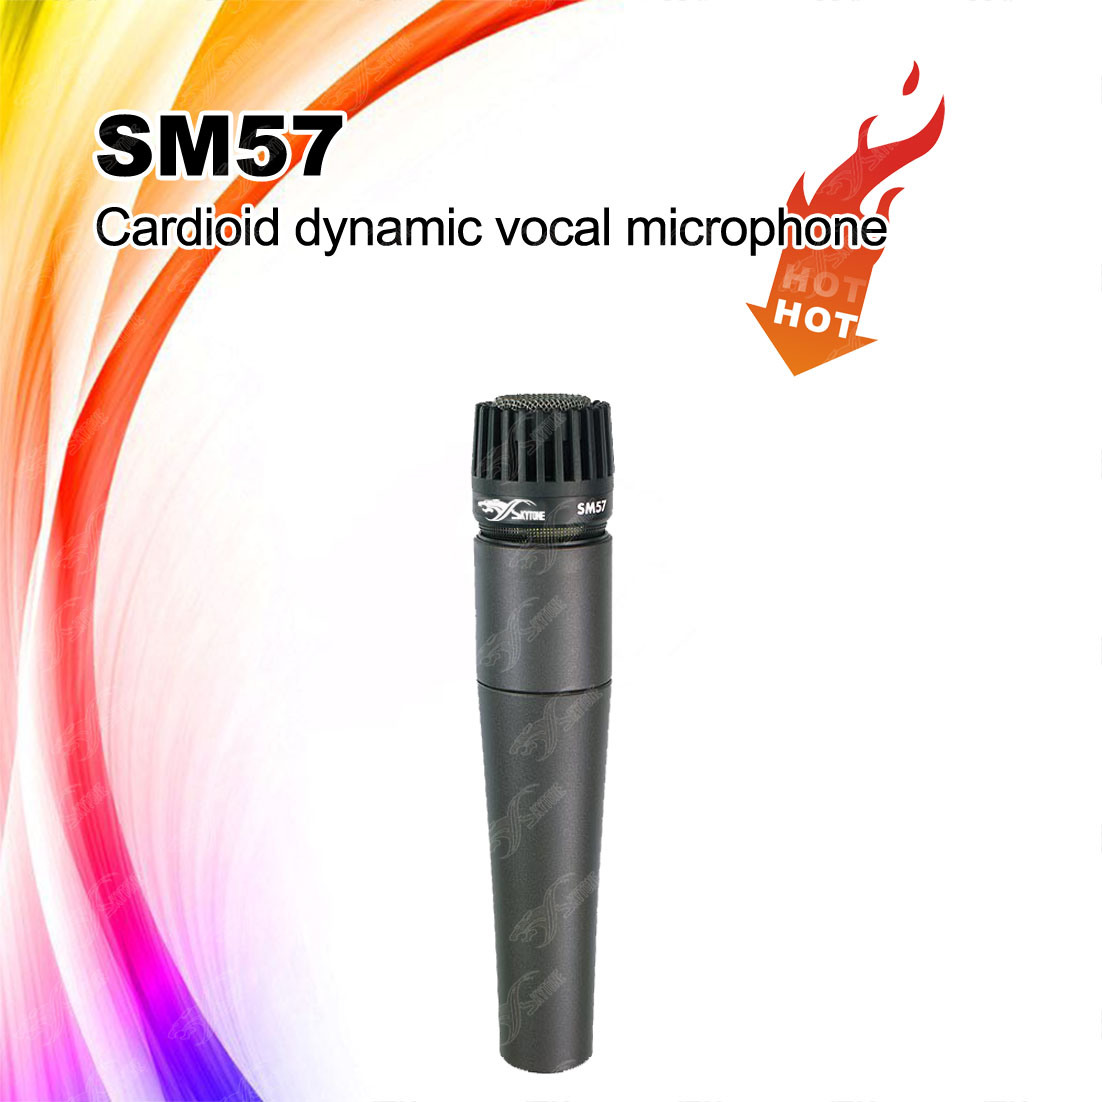 Sm57 Cardioid Handheld Vocal Dynamic Microphone